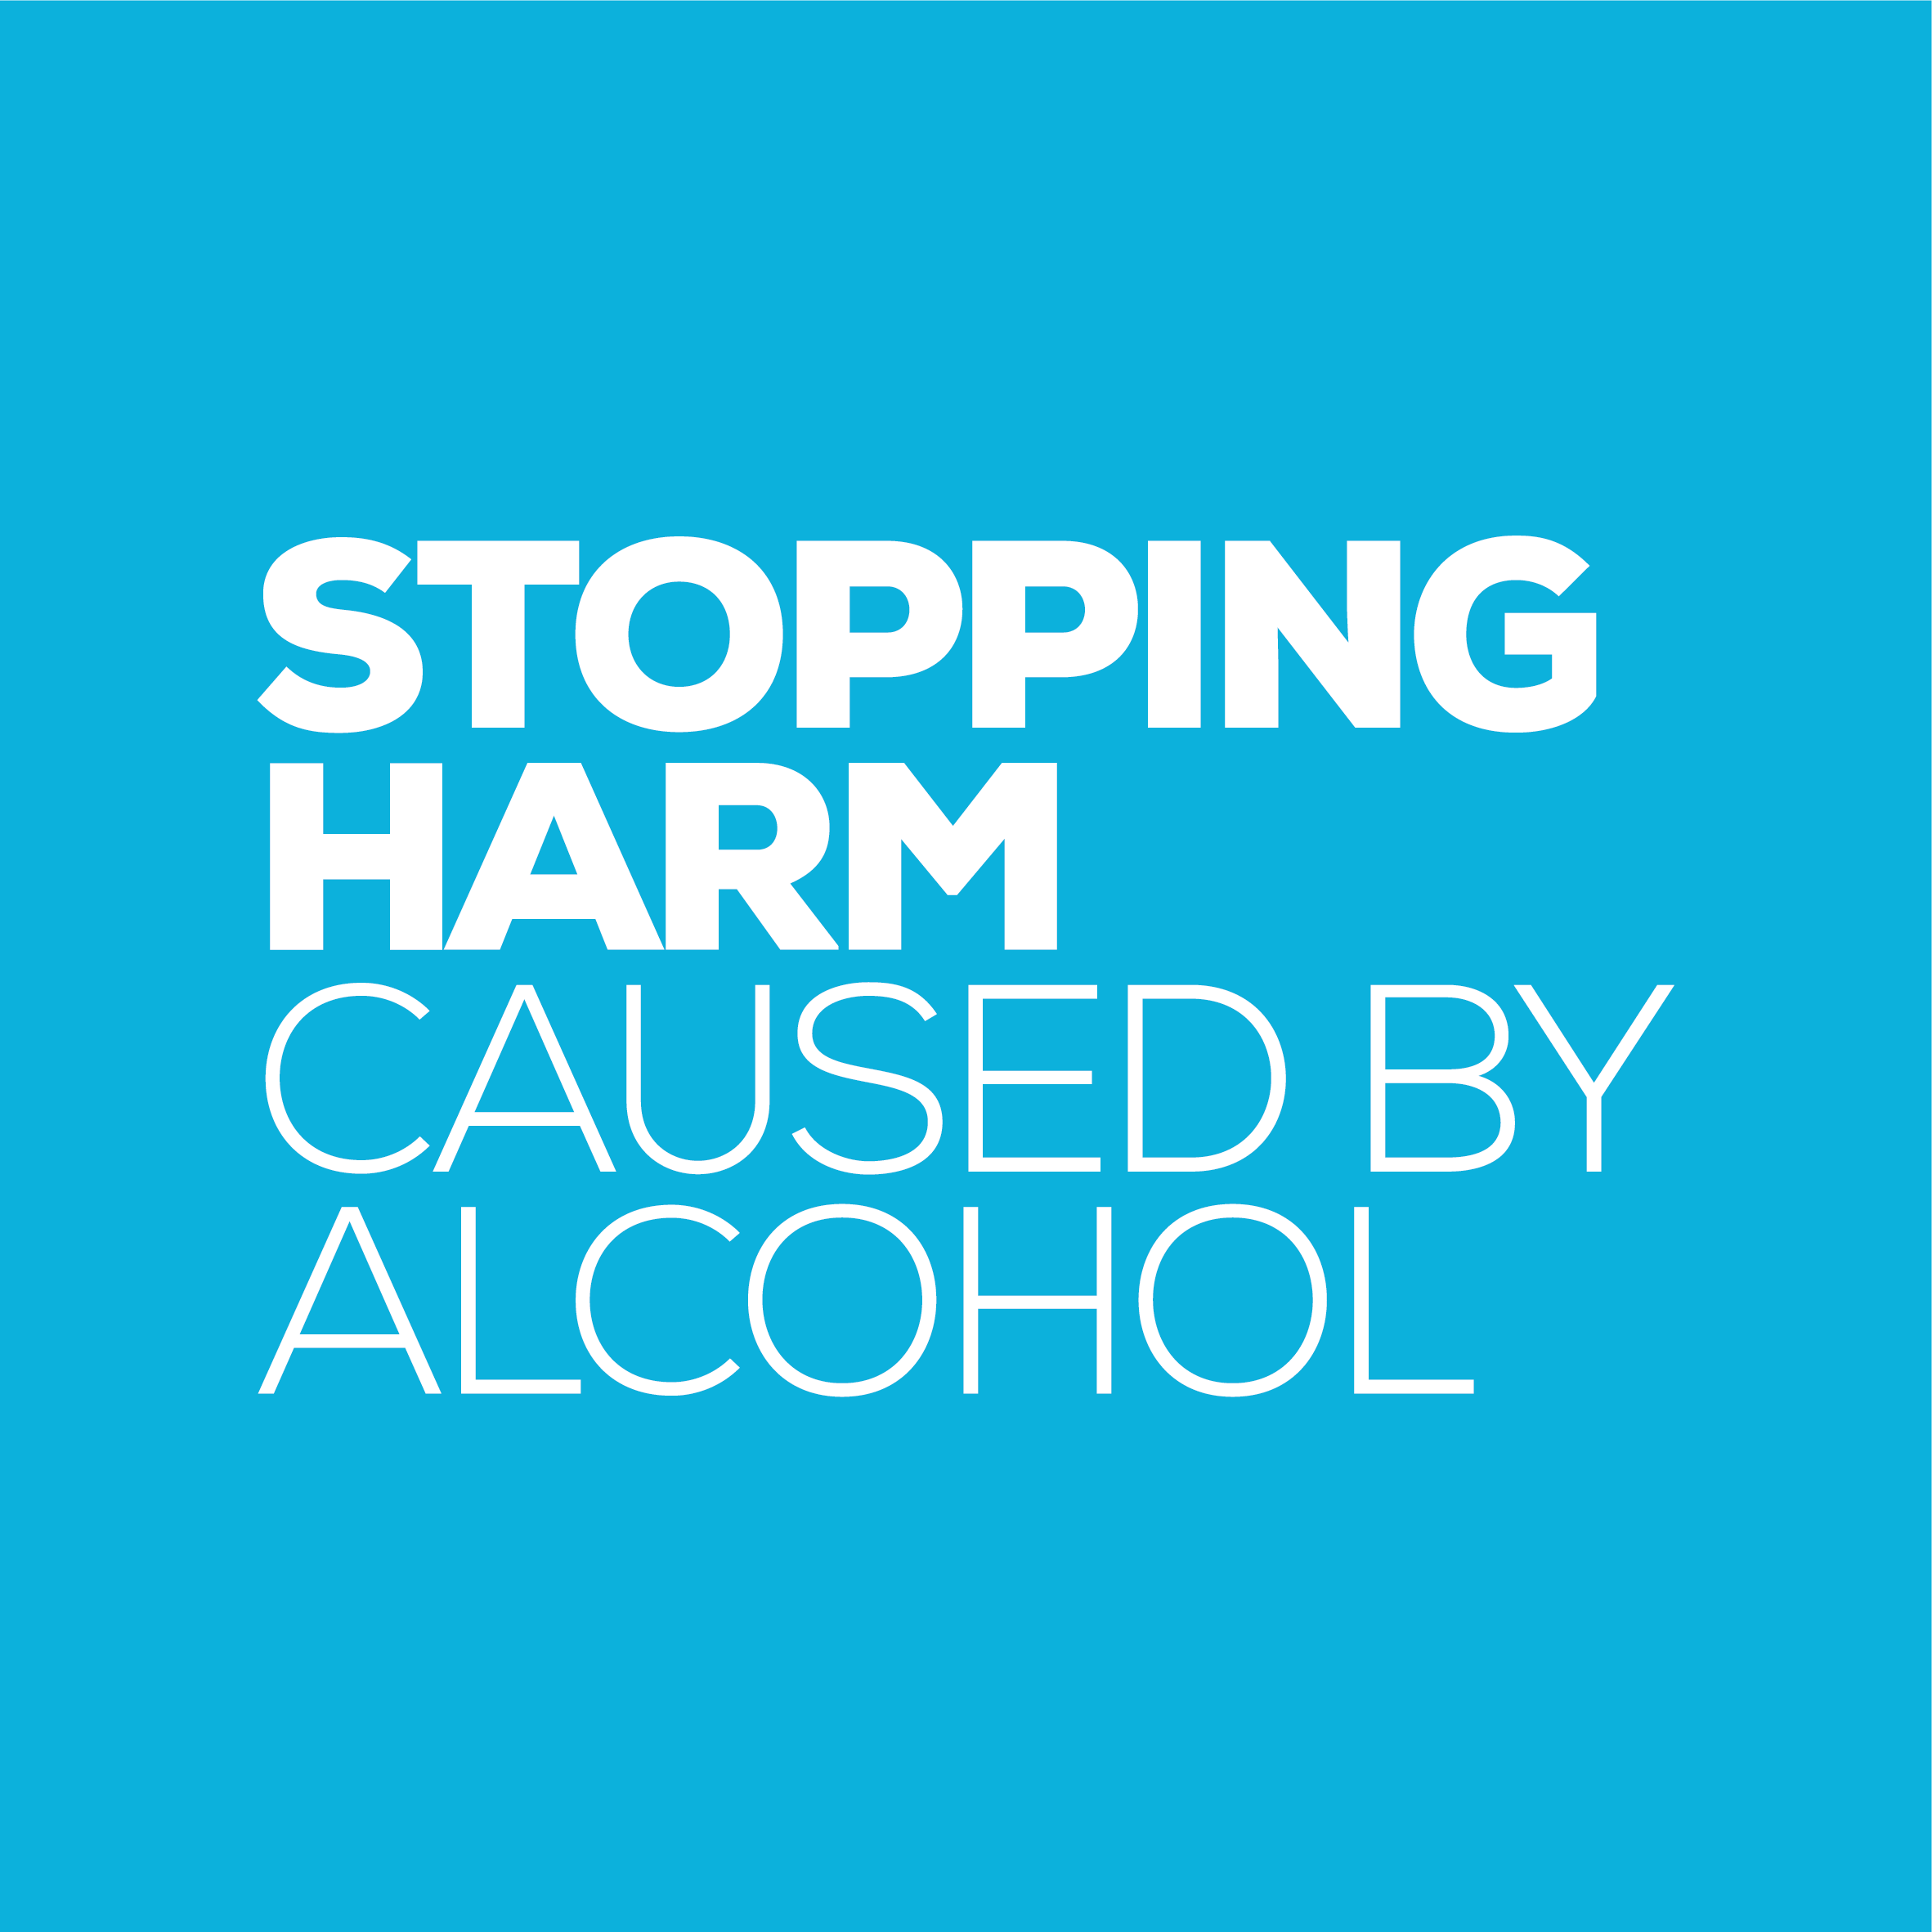 Alcohol policy reform – who will lead the way?